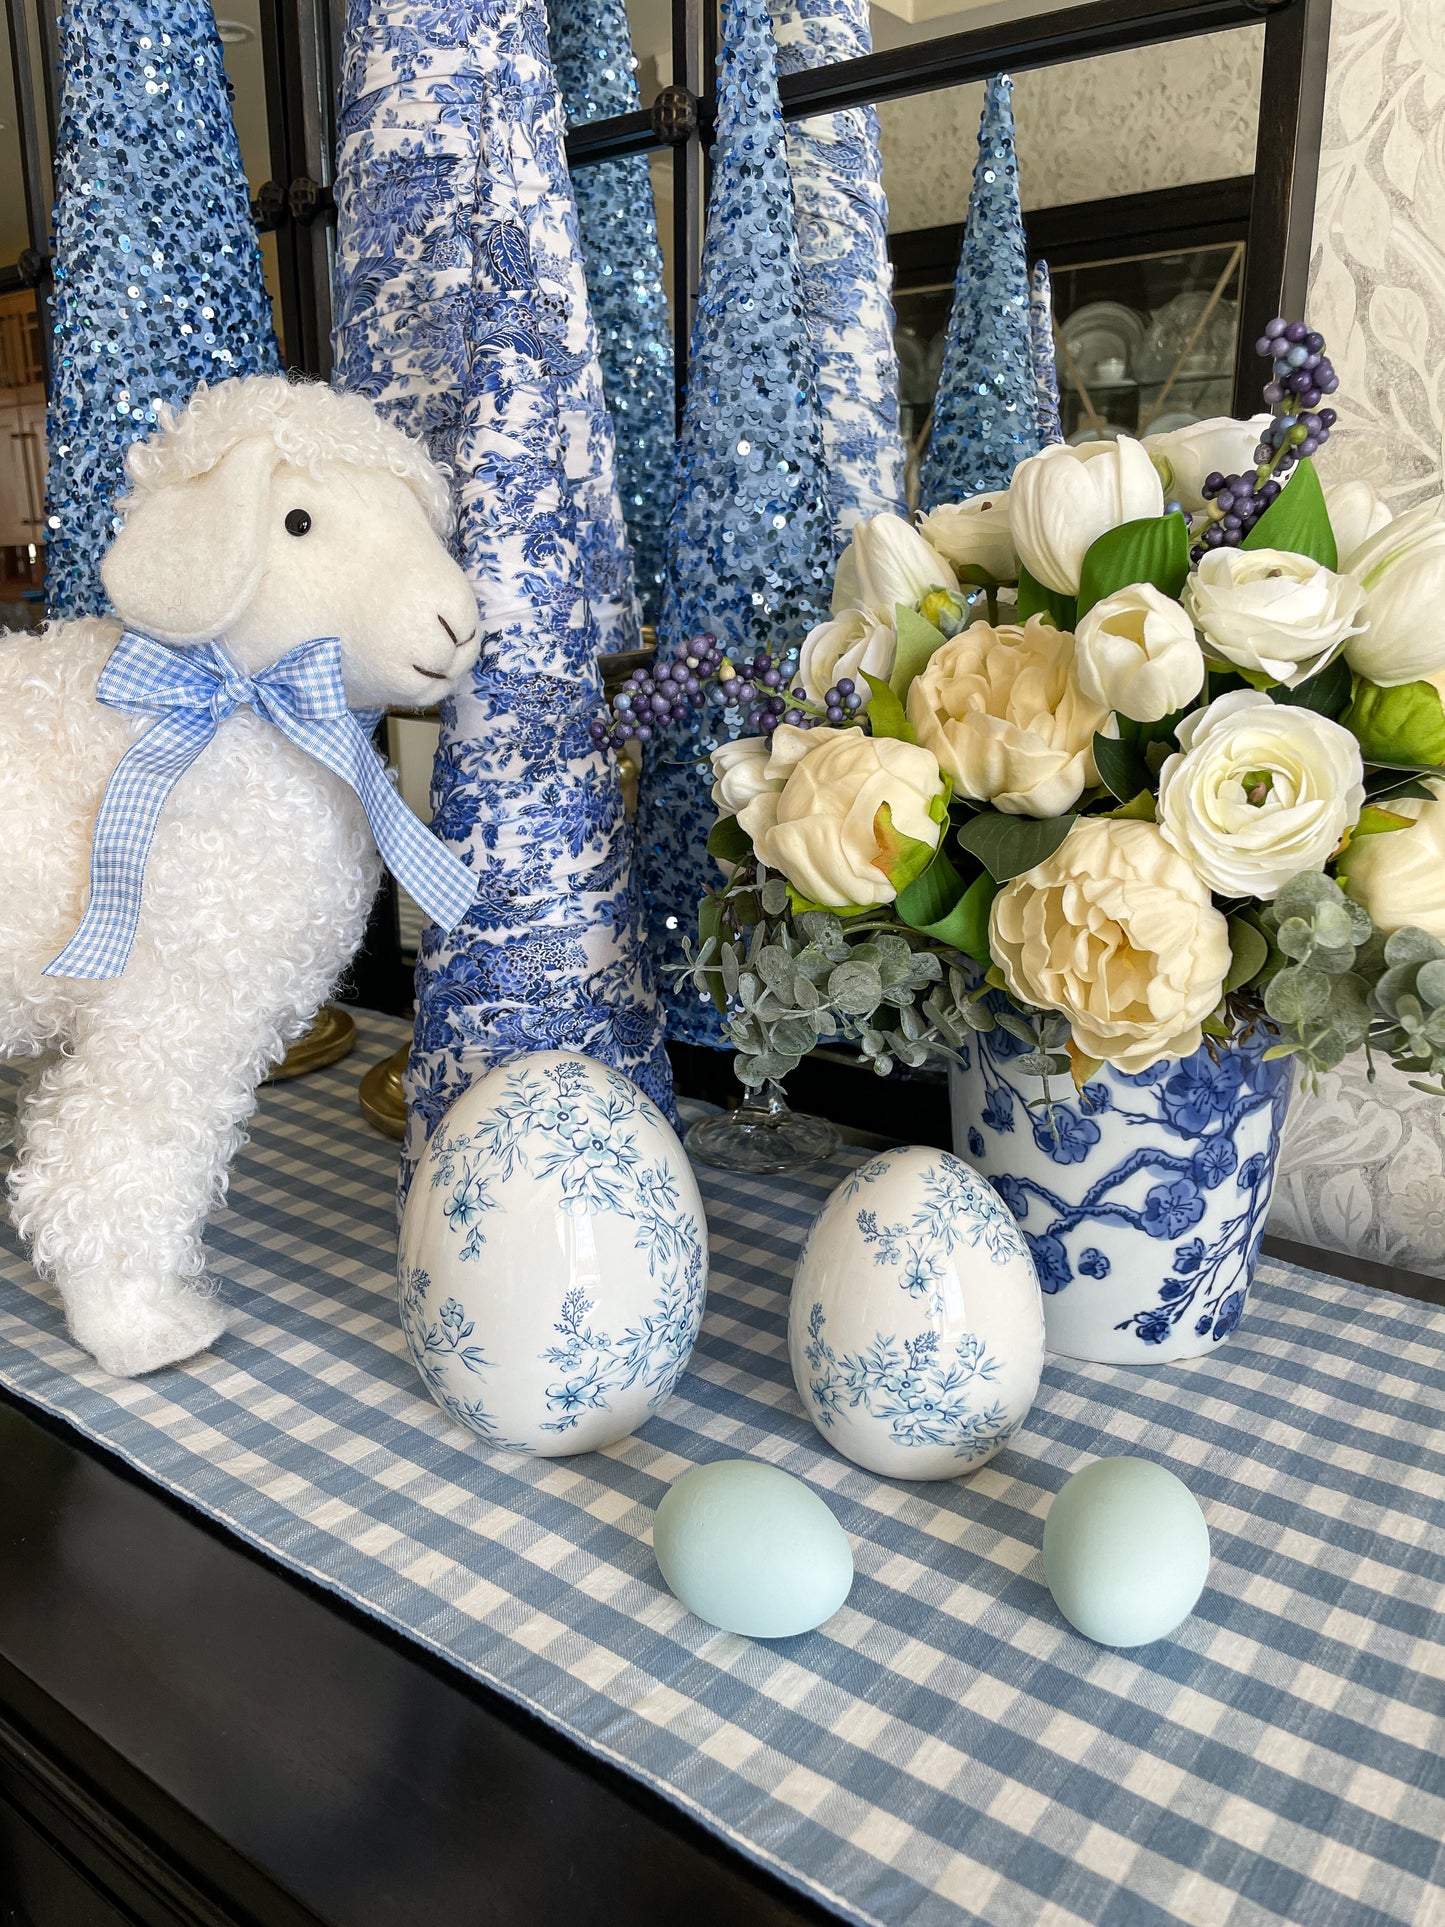 Blue Floral Eggs, Set of Two